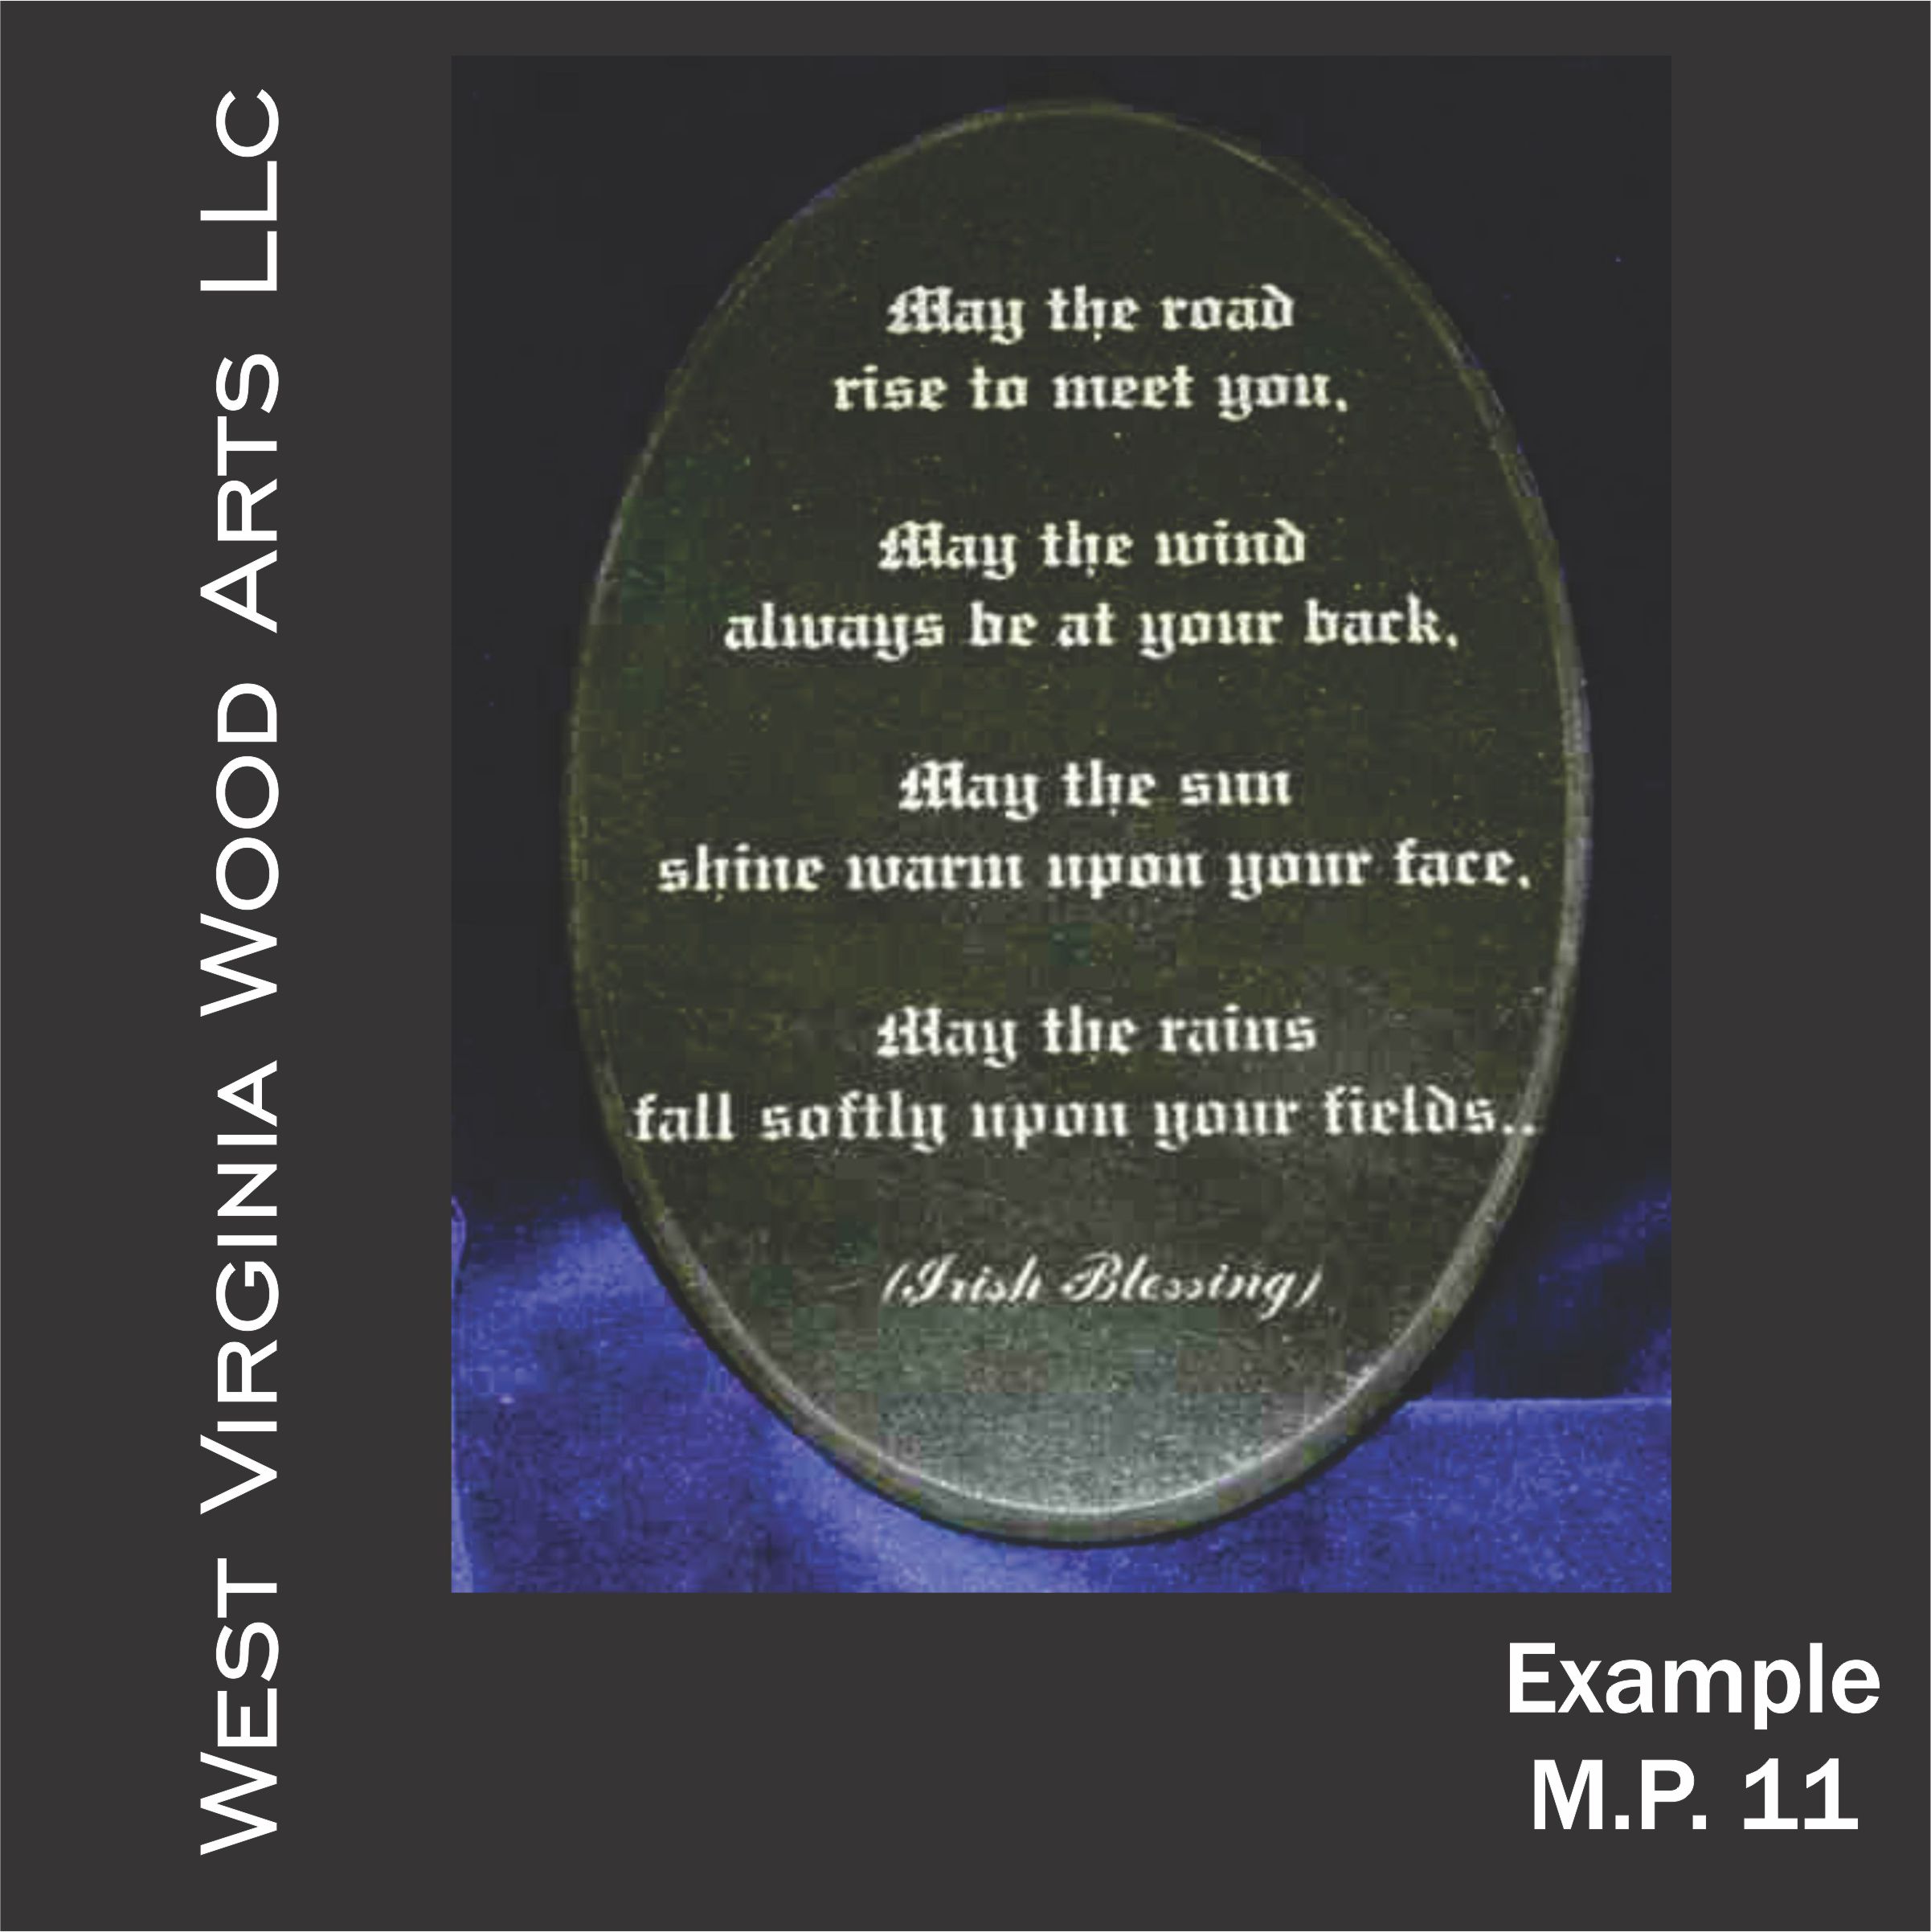 10 Inch Oval With Poem Engraved And Centered